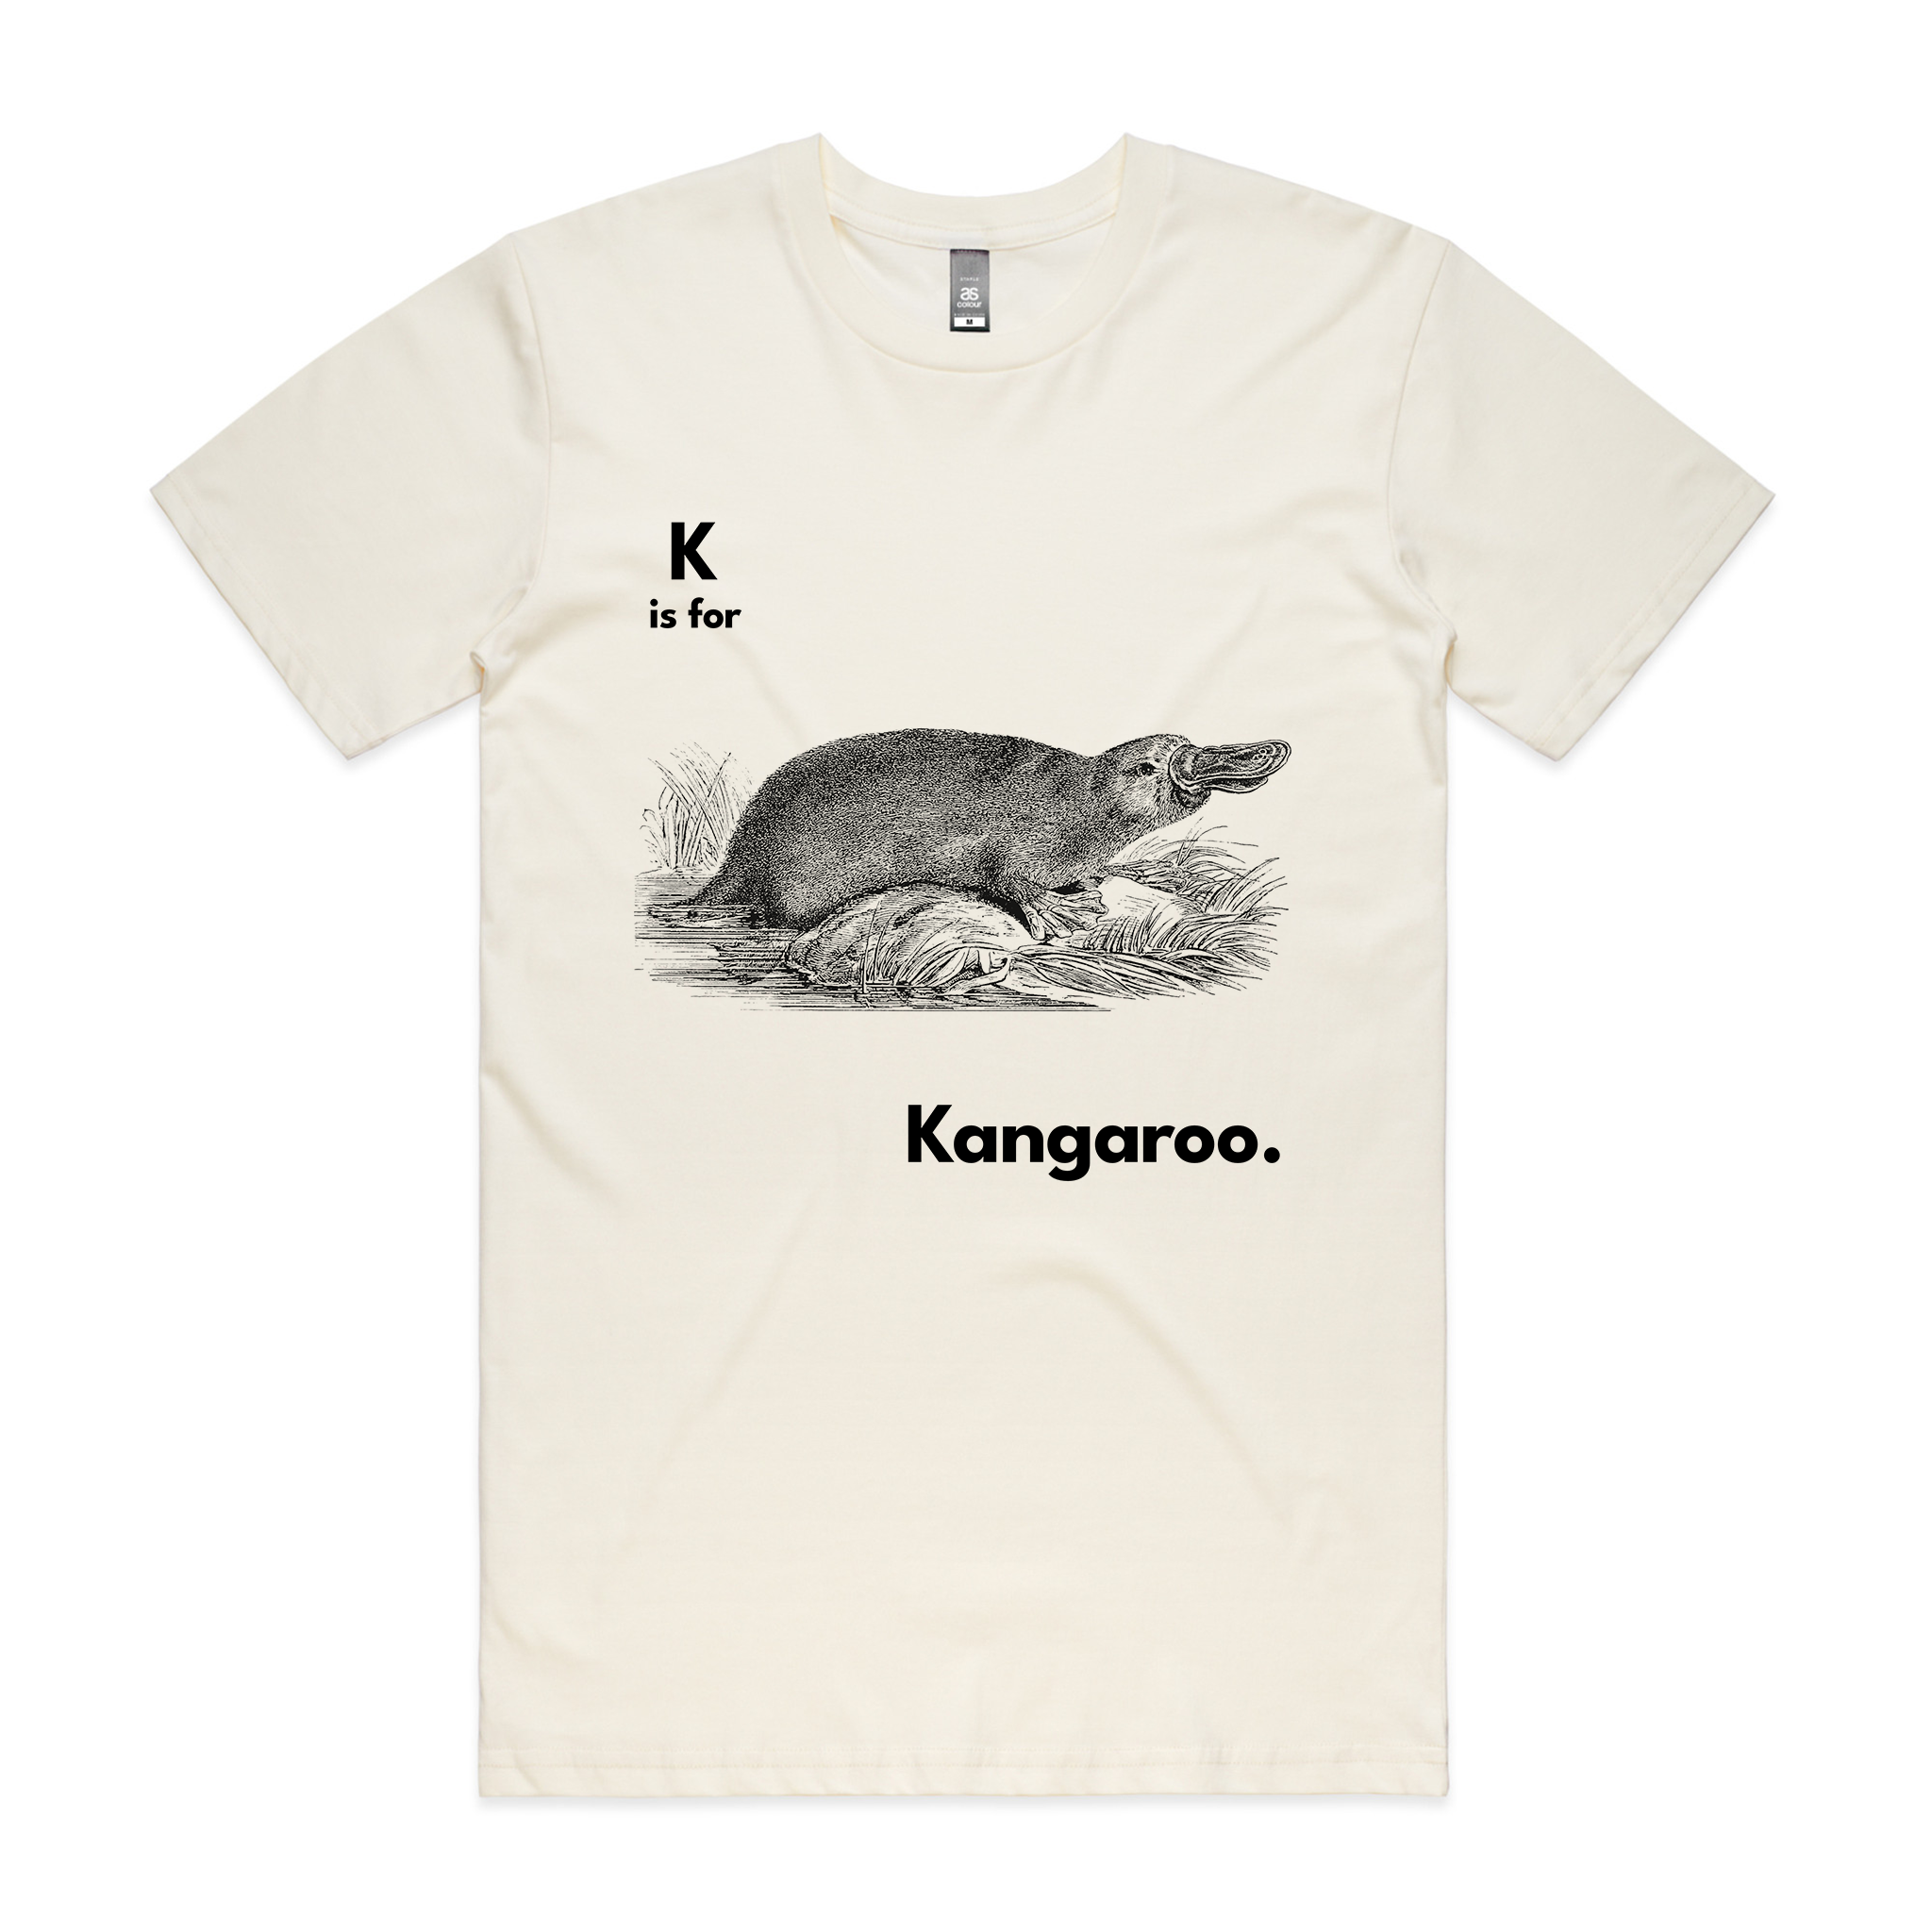 More! T-Shirts, Ethically For Tee Made & K Hoodies, Is Jumpers Kangaroo